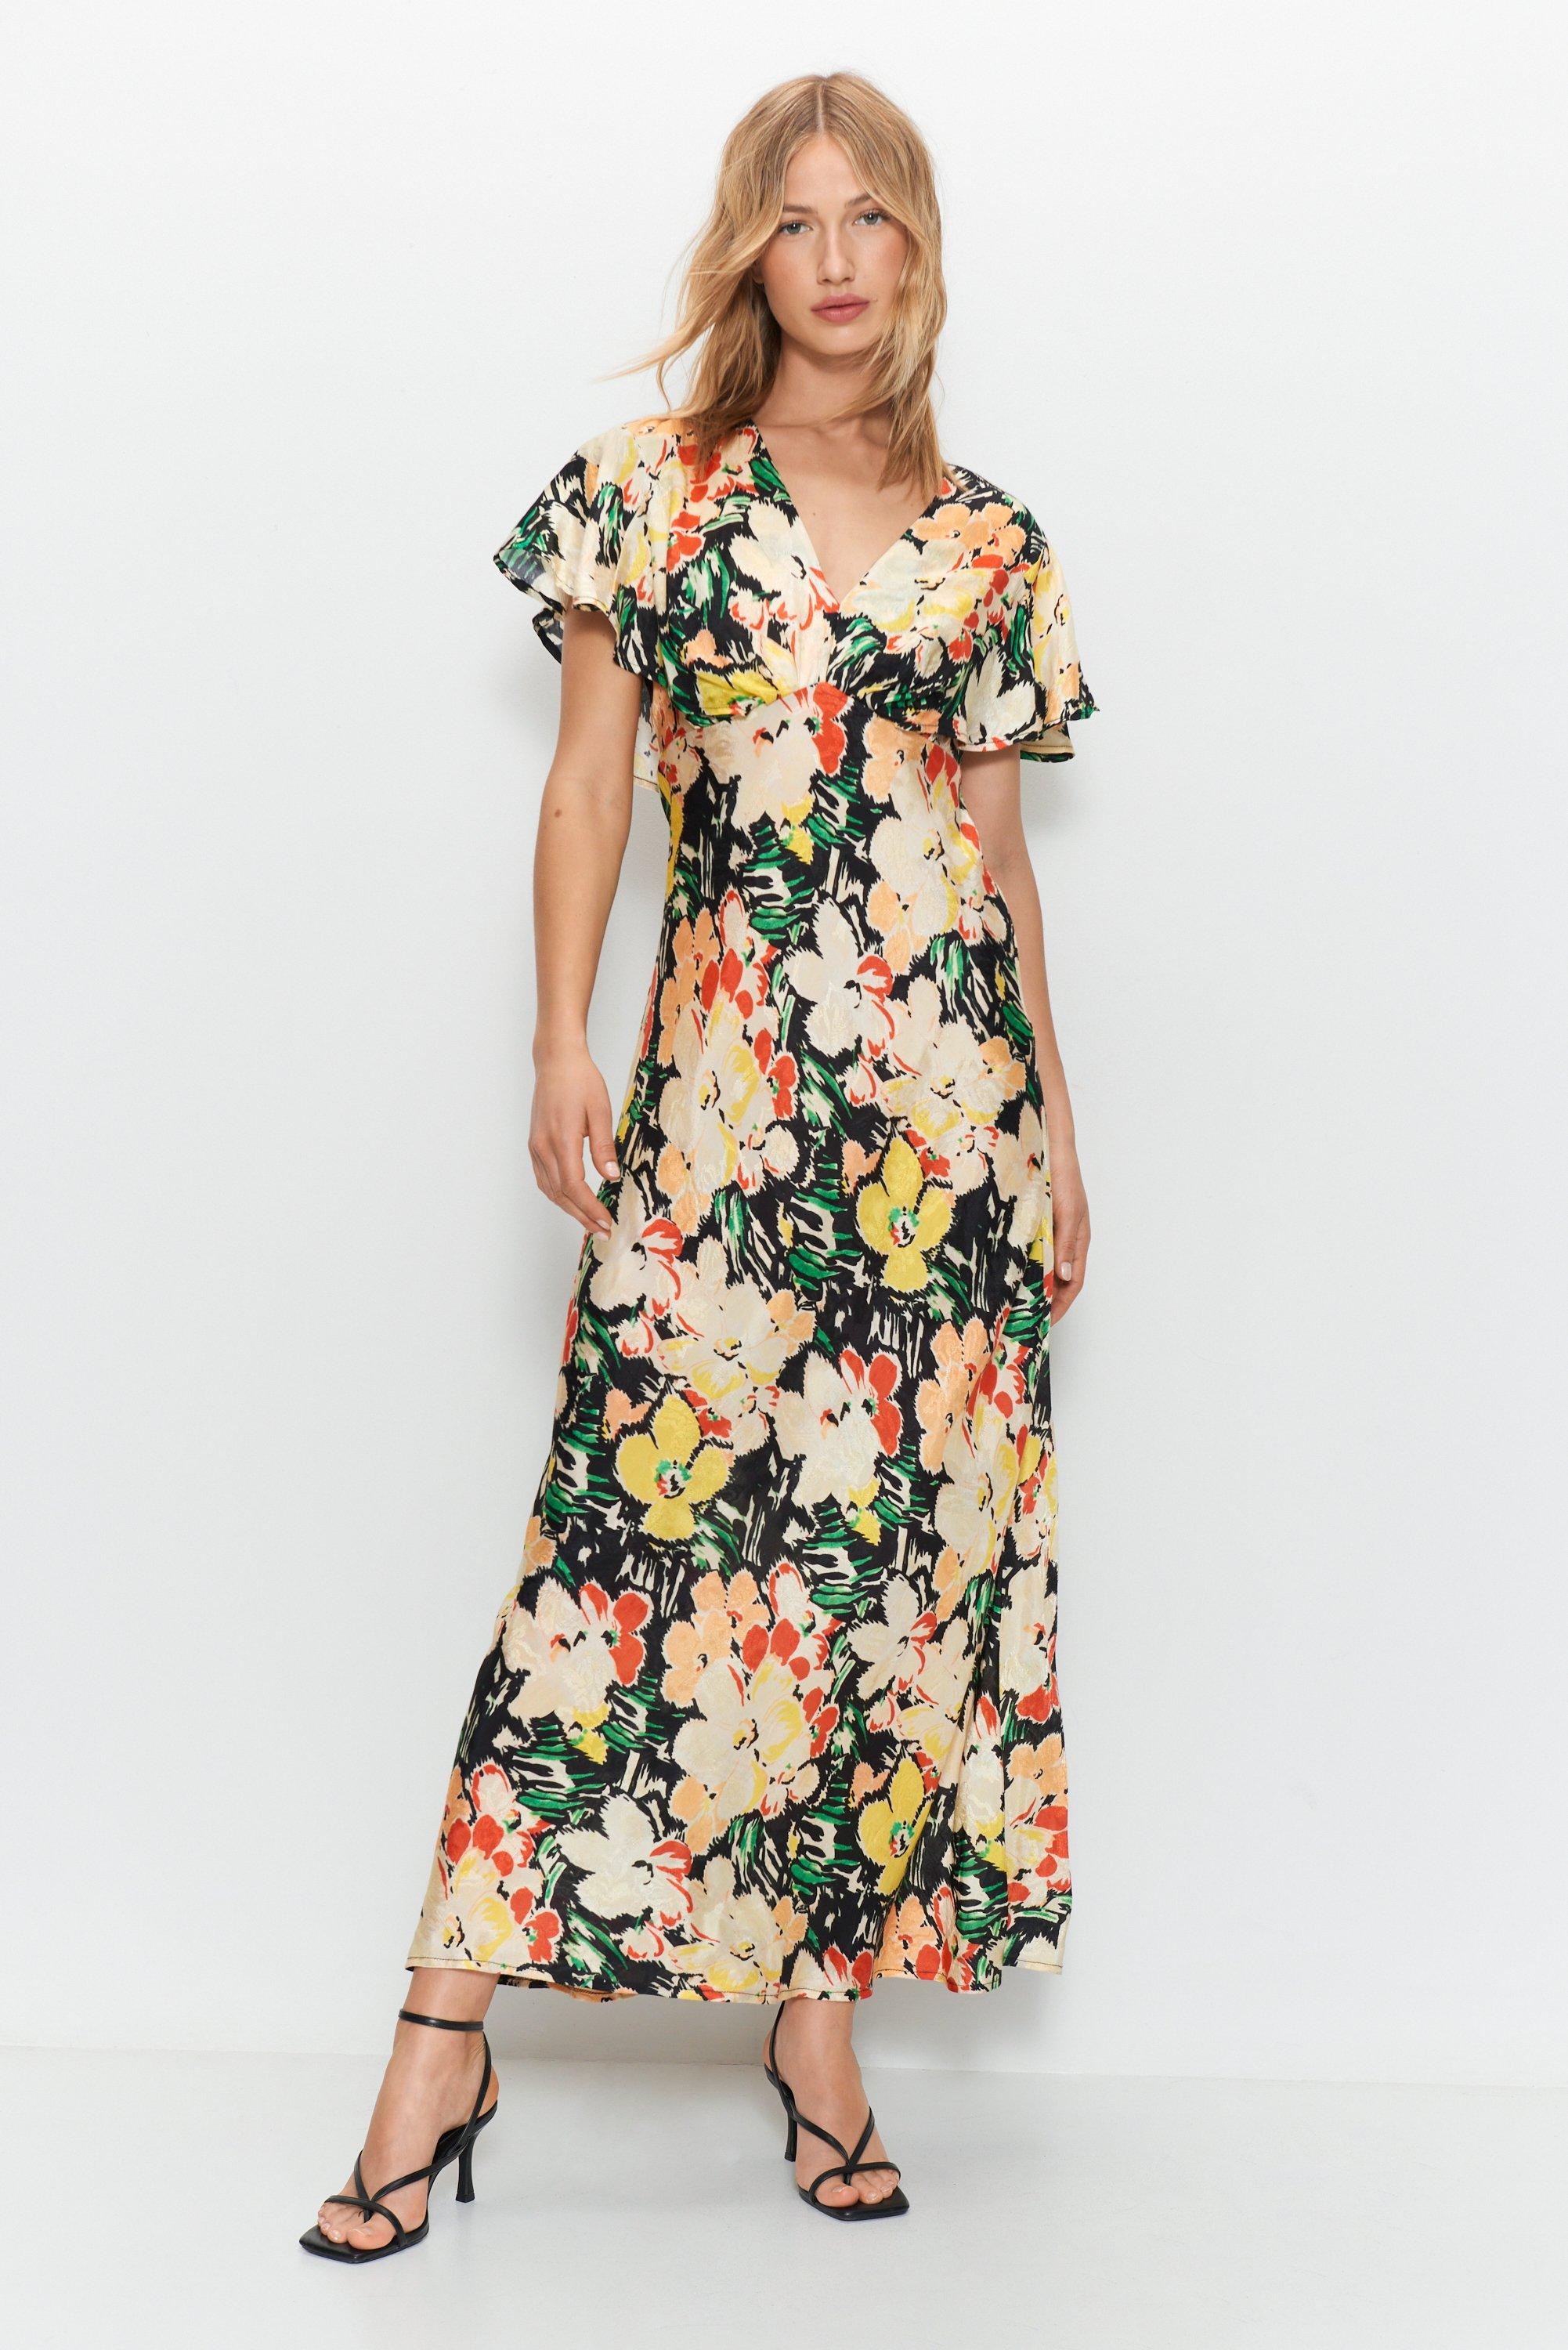 Hope & Ivy Maternity Wrap Maxi Tea Dress In Coral Floral-Green